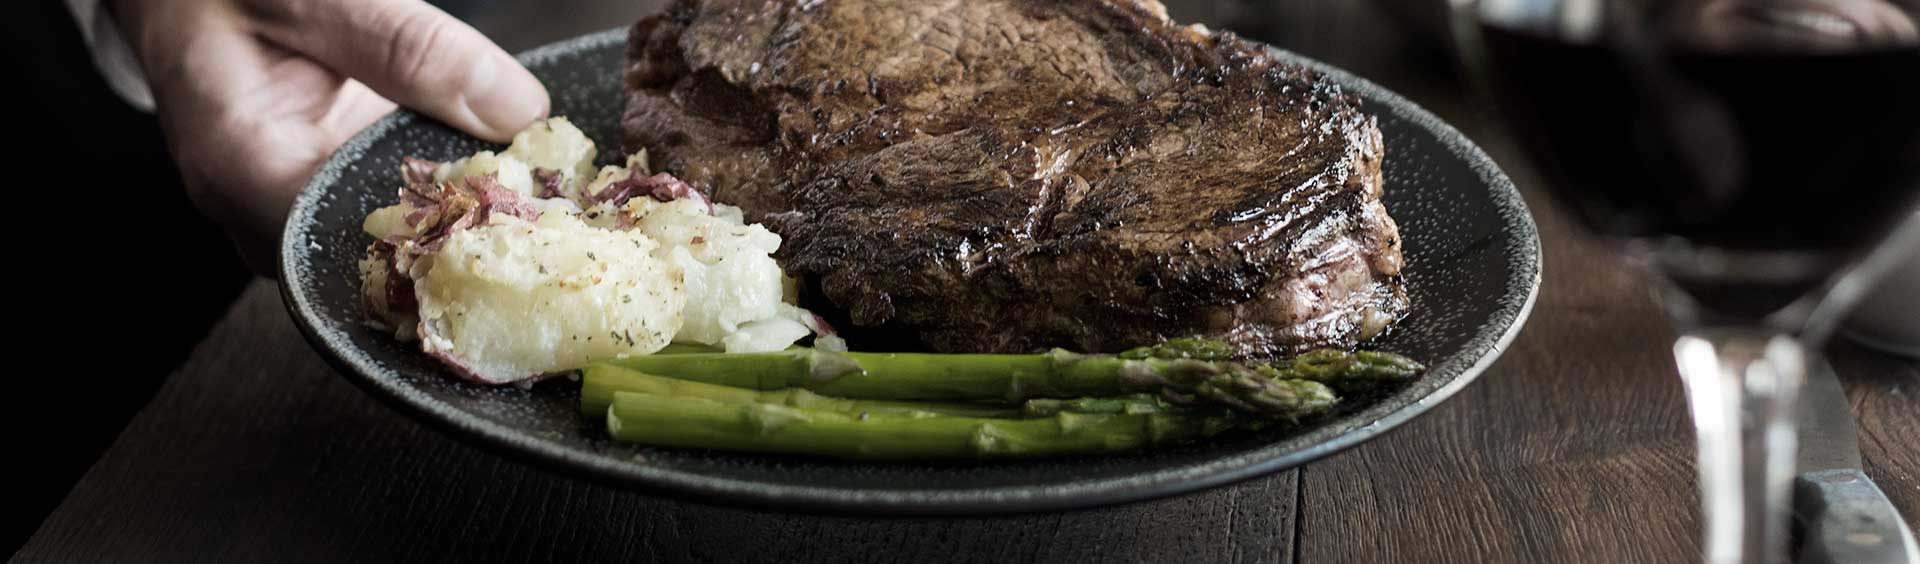 Steak, asparagus, and mashed potatoes on a plate